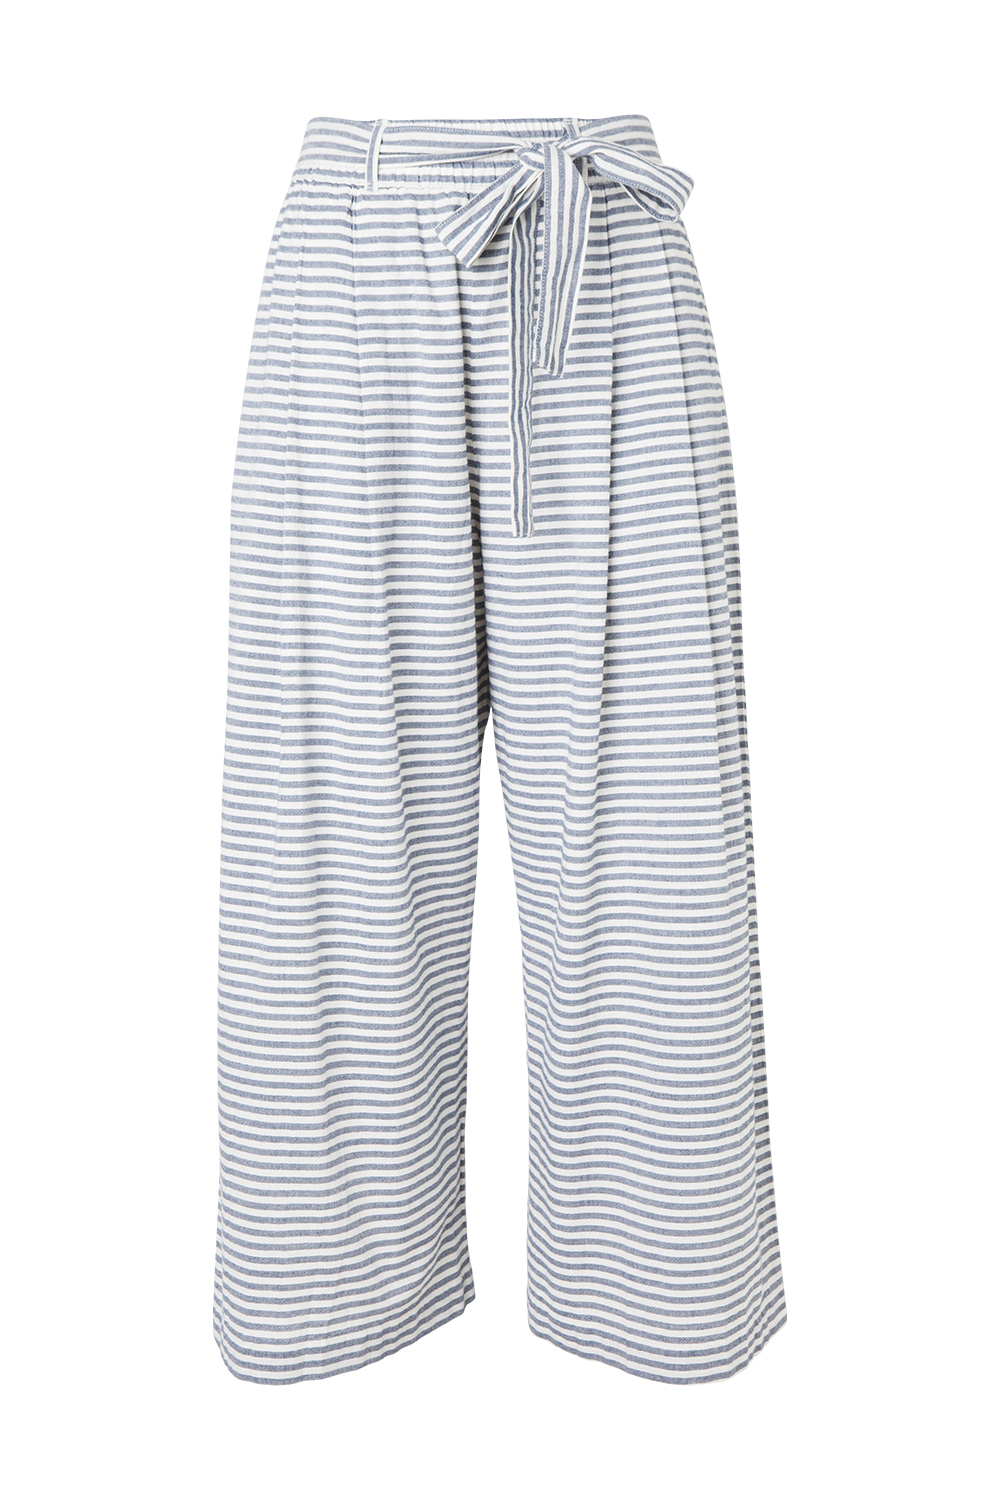 Pants, $229, by Kowtow.